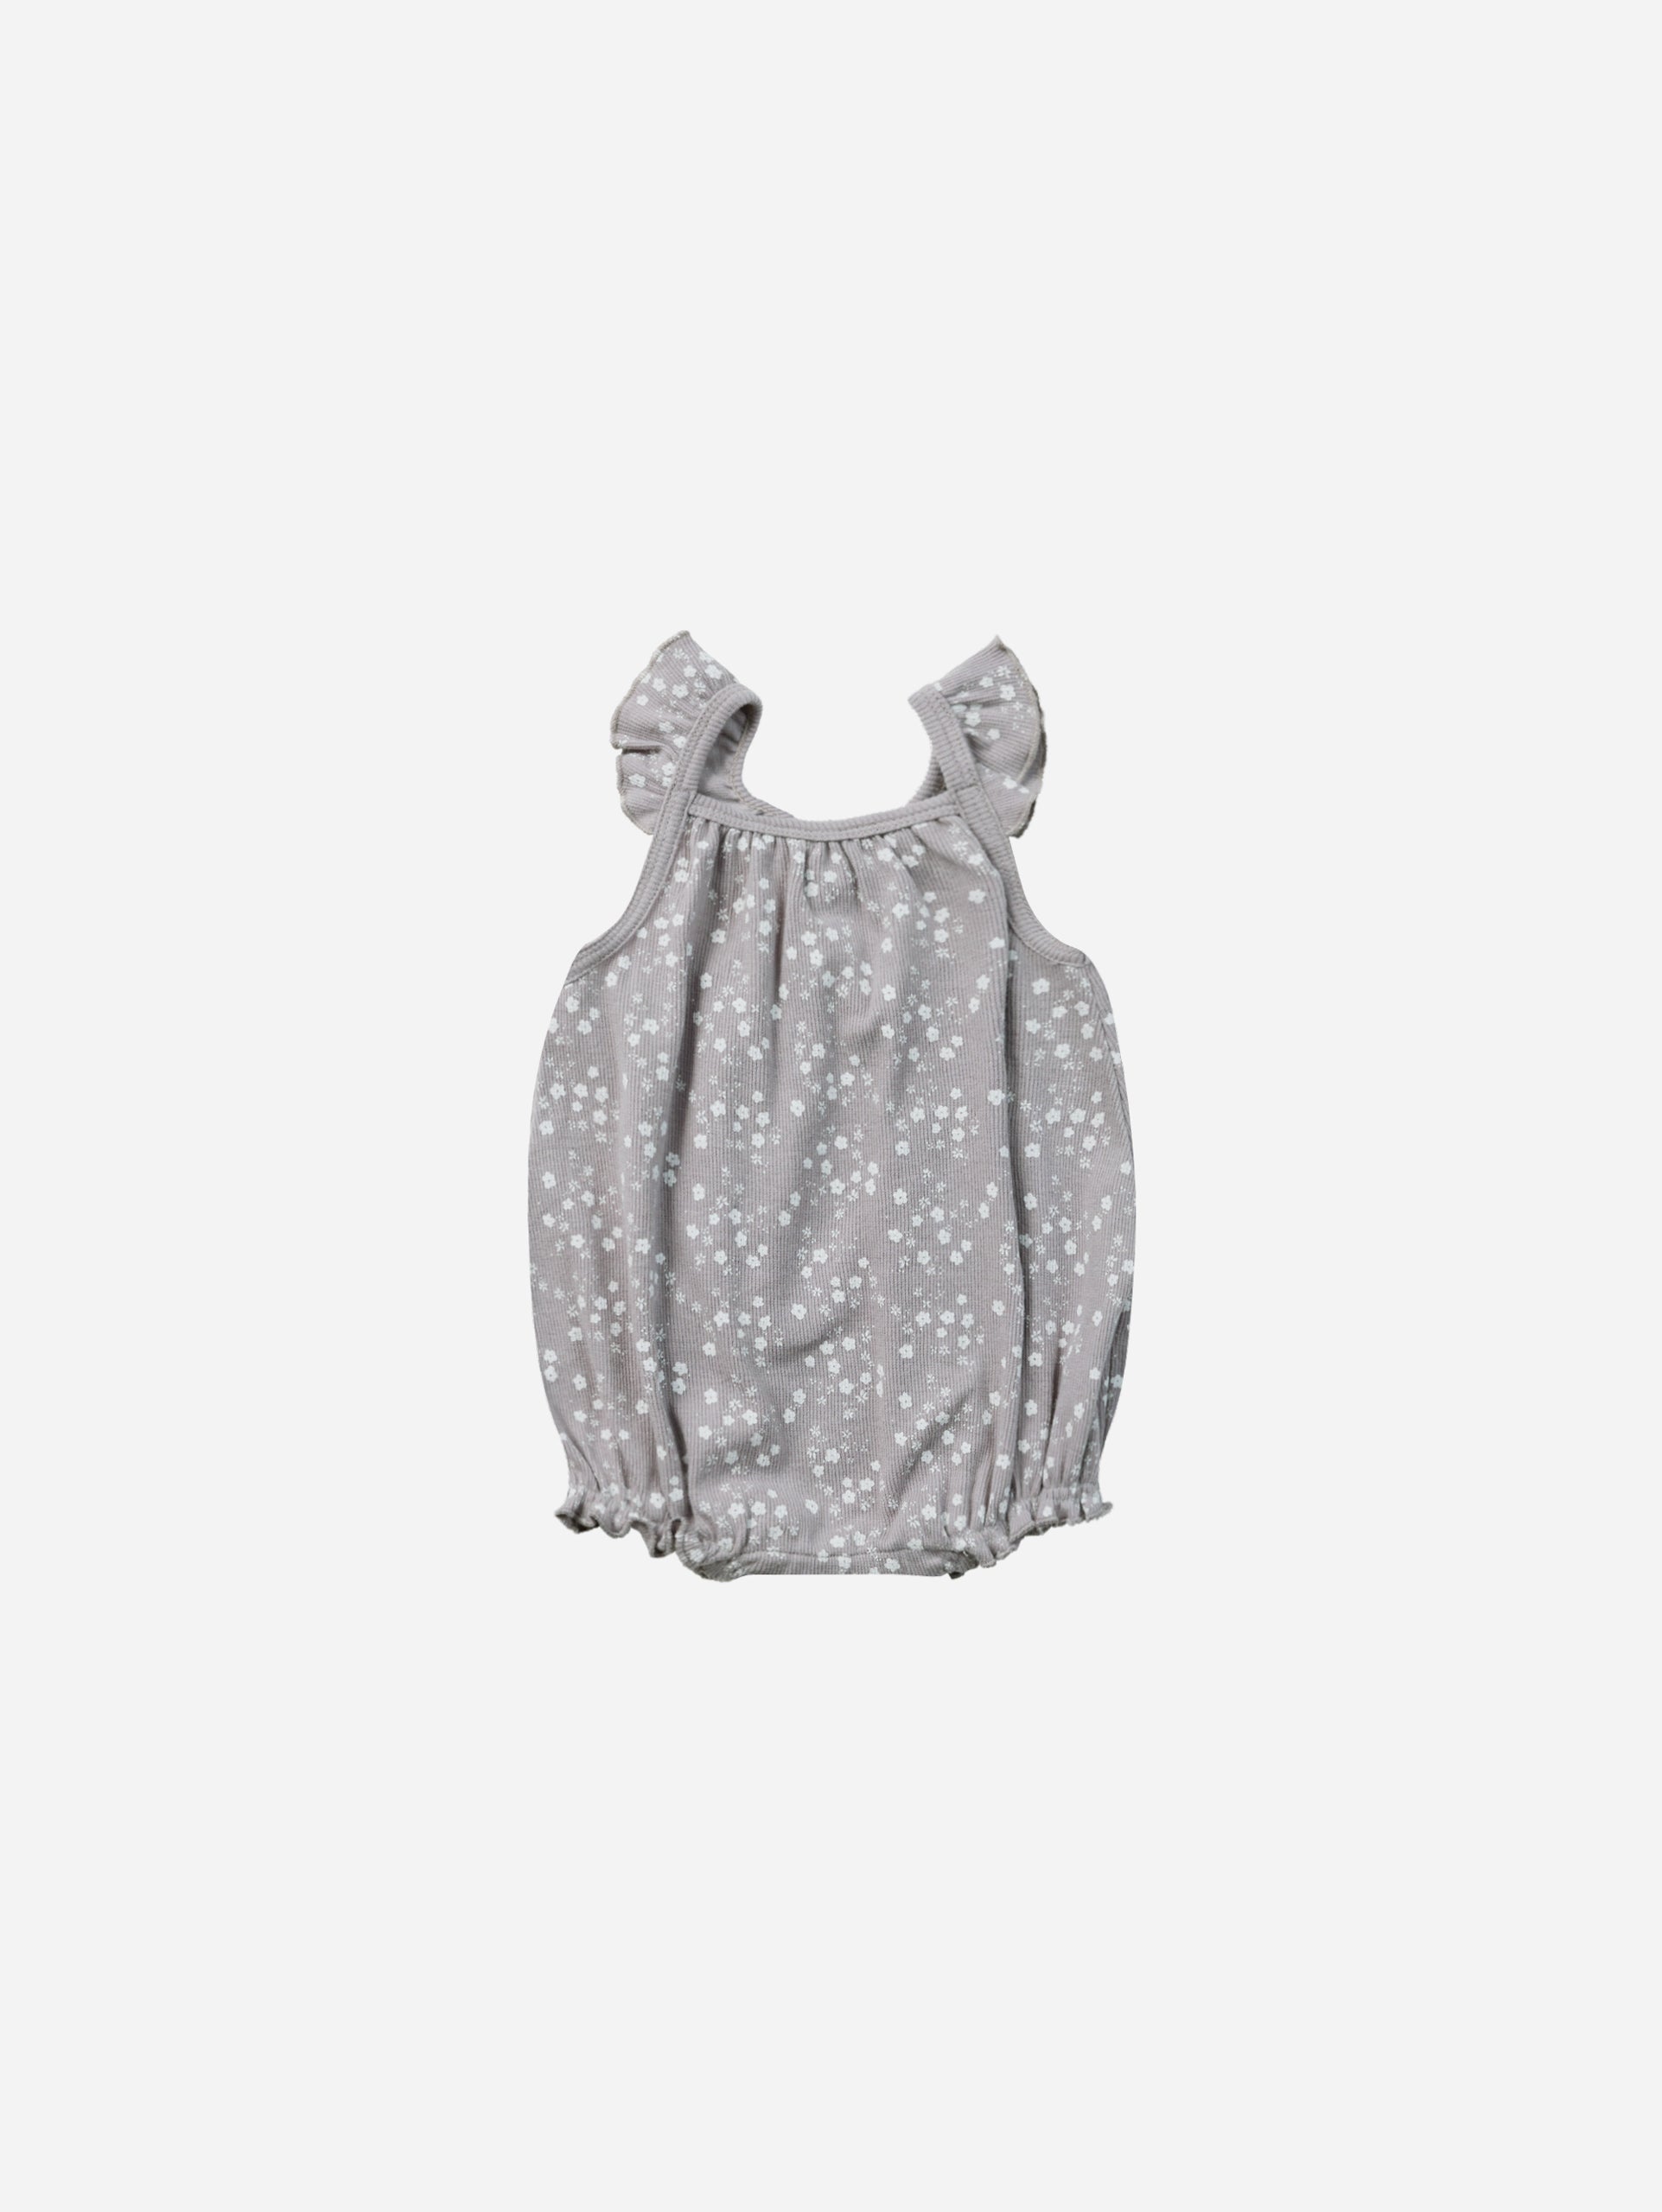 Ribbed Ruffle Romper || Fleur - Rylee + Cru | Kids Clothes | Trendy Baby Clothes | Modern Infant Outfits |